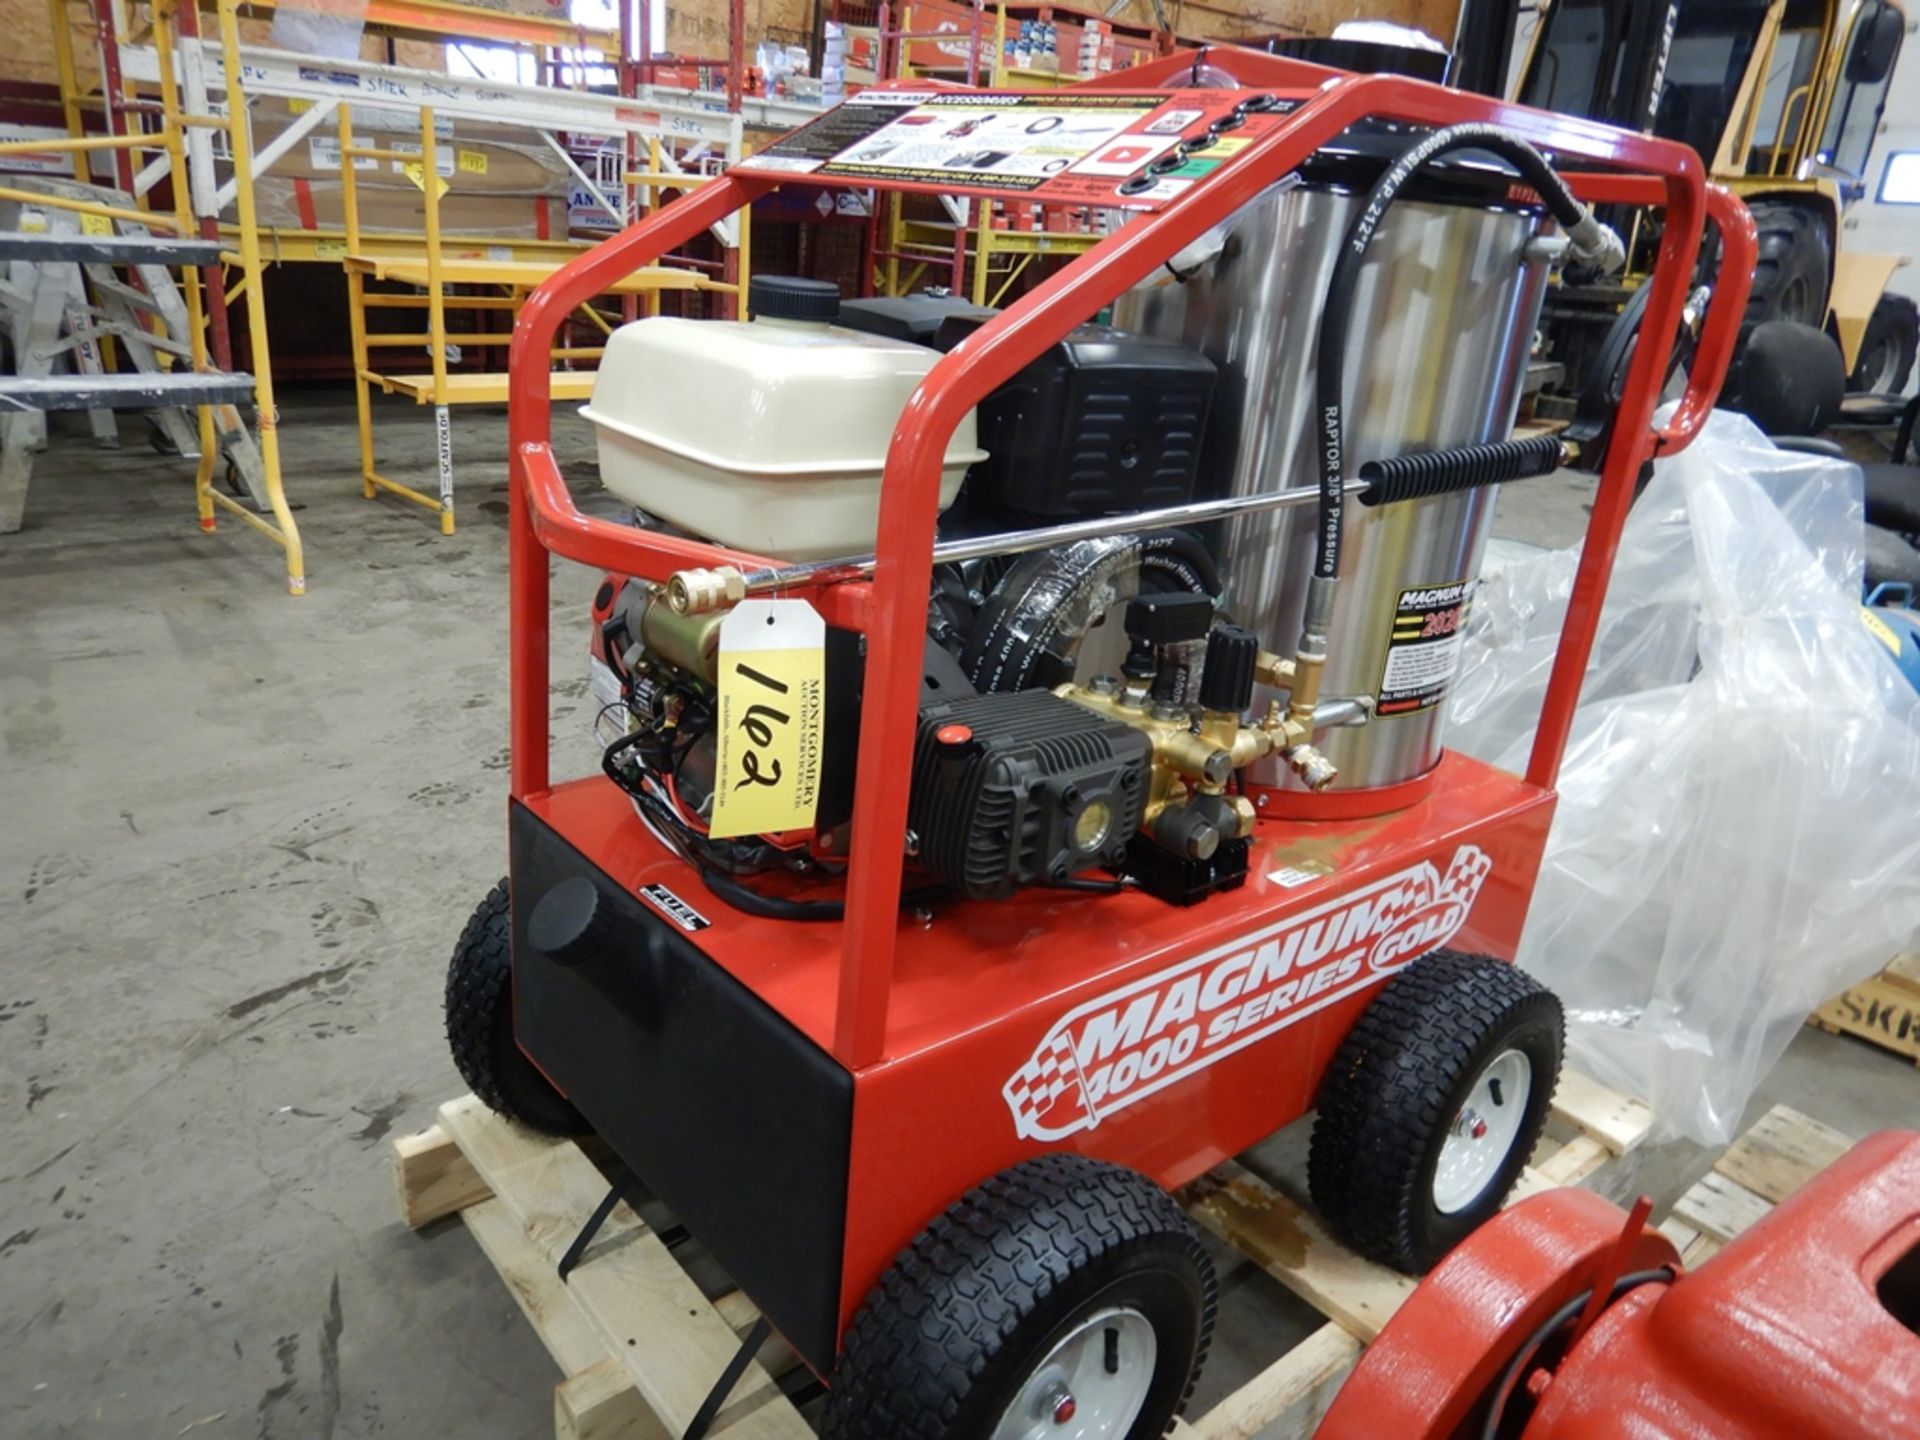 EASY KLEEN MAGNUM 4000 GOLD HOT WATER PRESSURE WASHER W/15HP ENGINE & ACCESSORIES, NEW IN CRATE S/